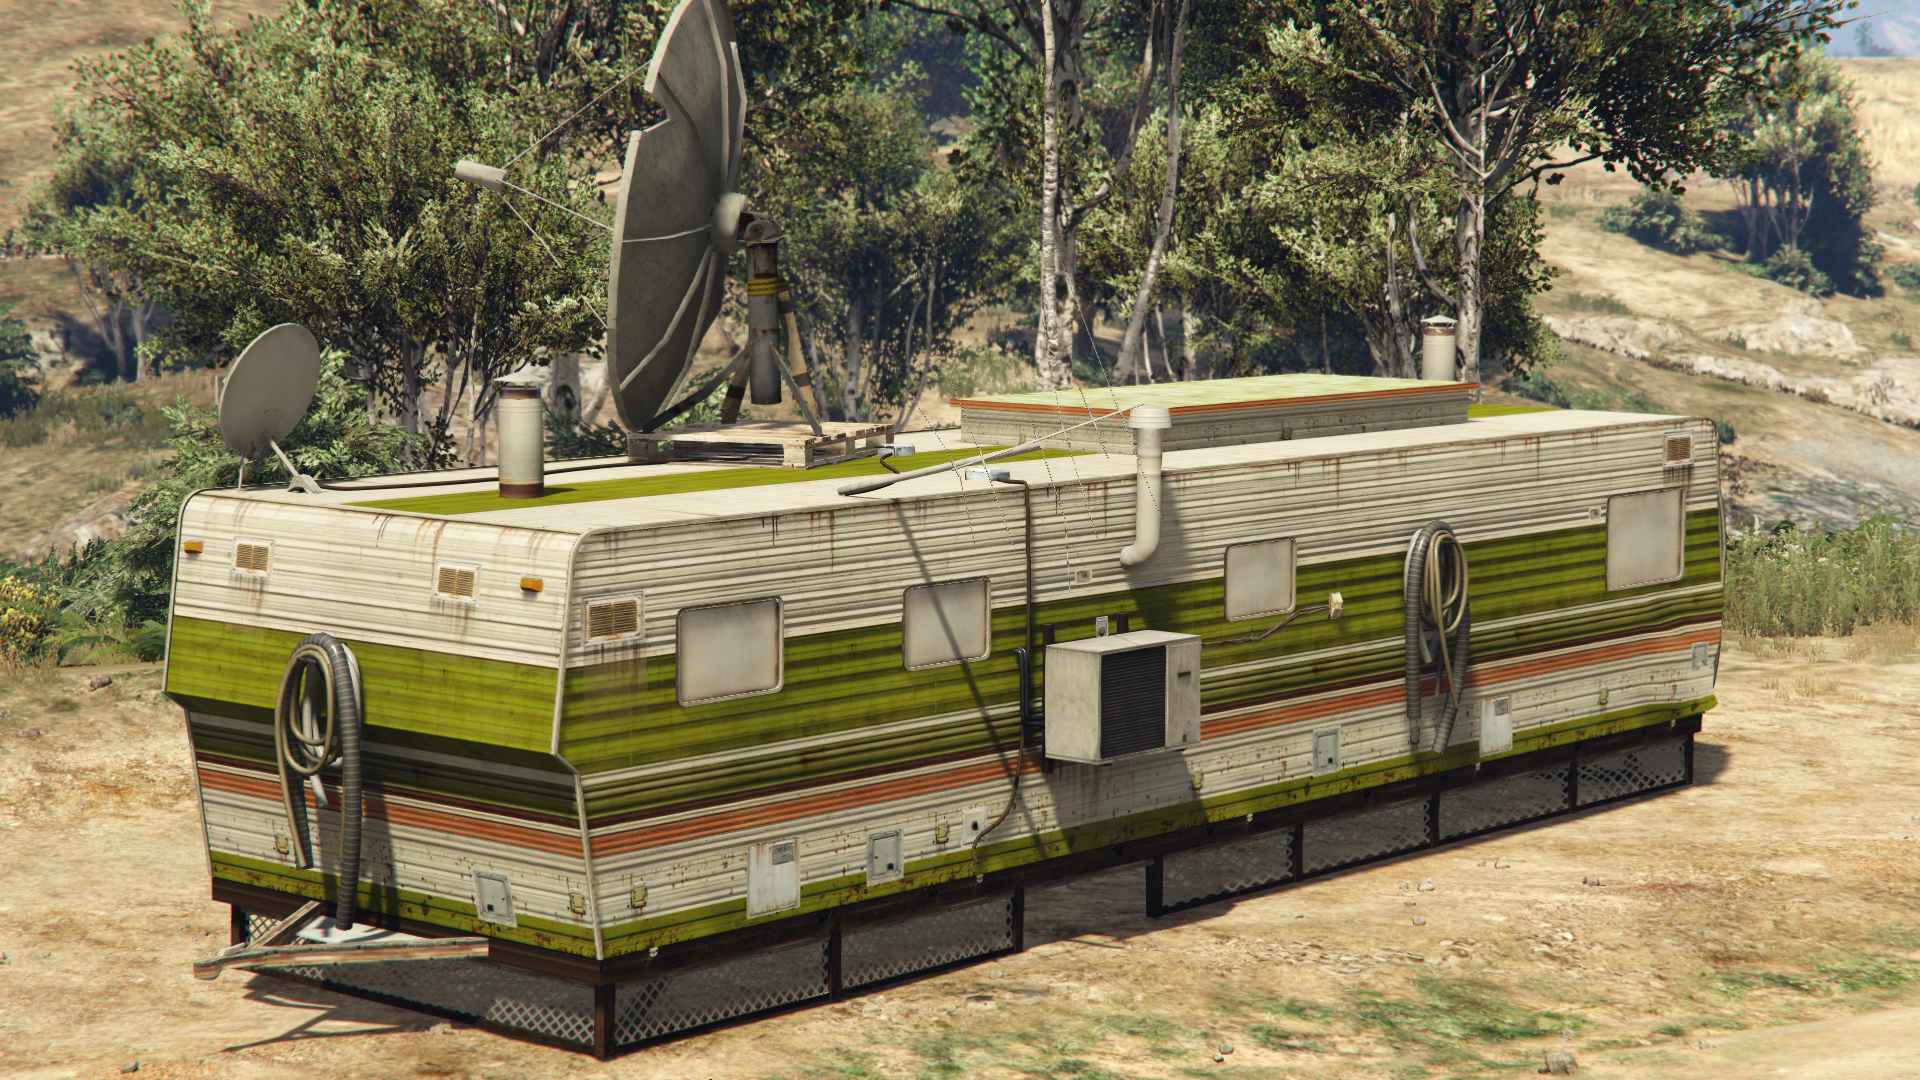 https://static.wikia.nocookie.net/gtawiki/images/0/0a/PropTrailer-GTAVe-front.png/revision/latest?cb=20230509104600